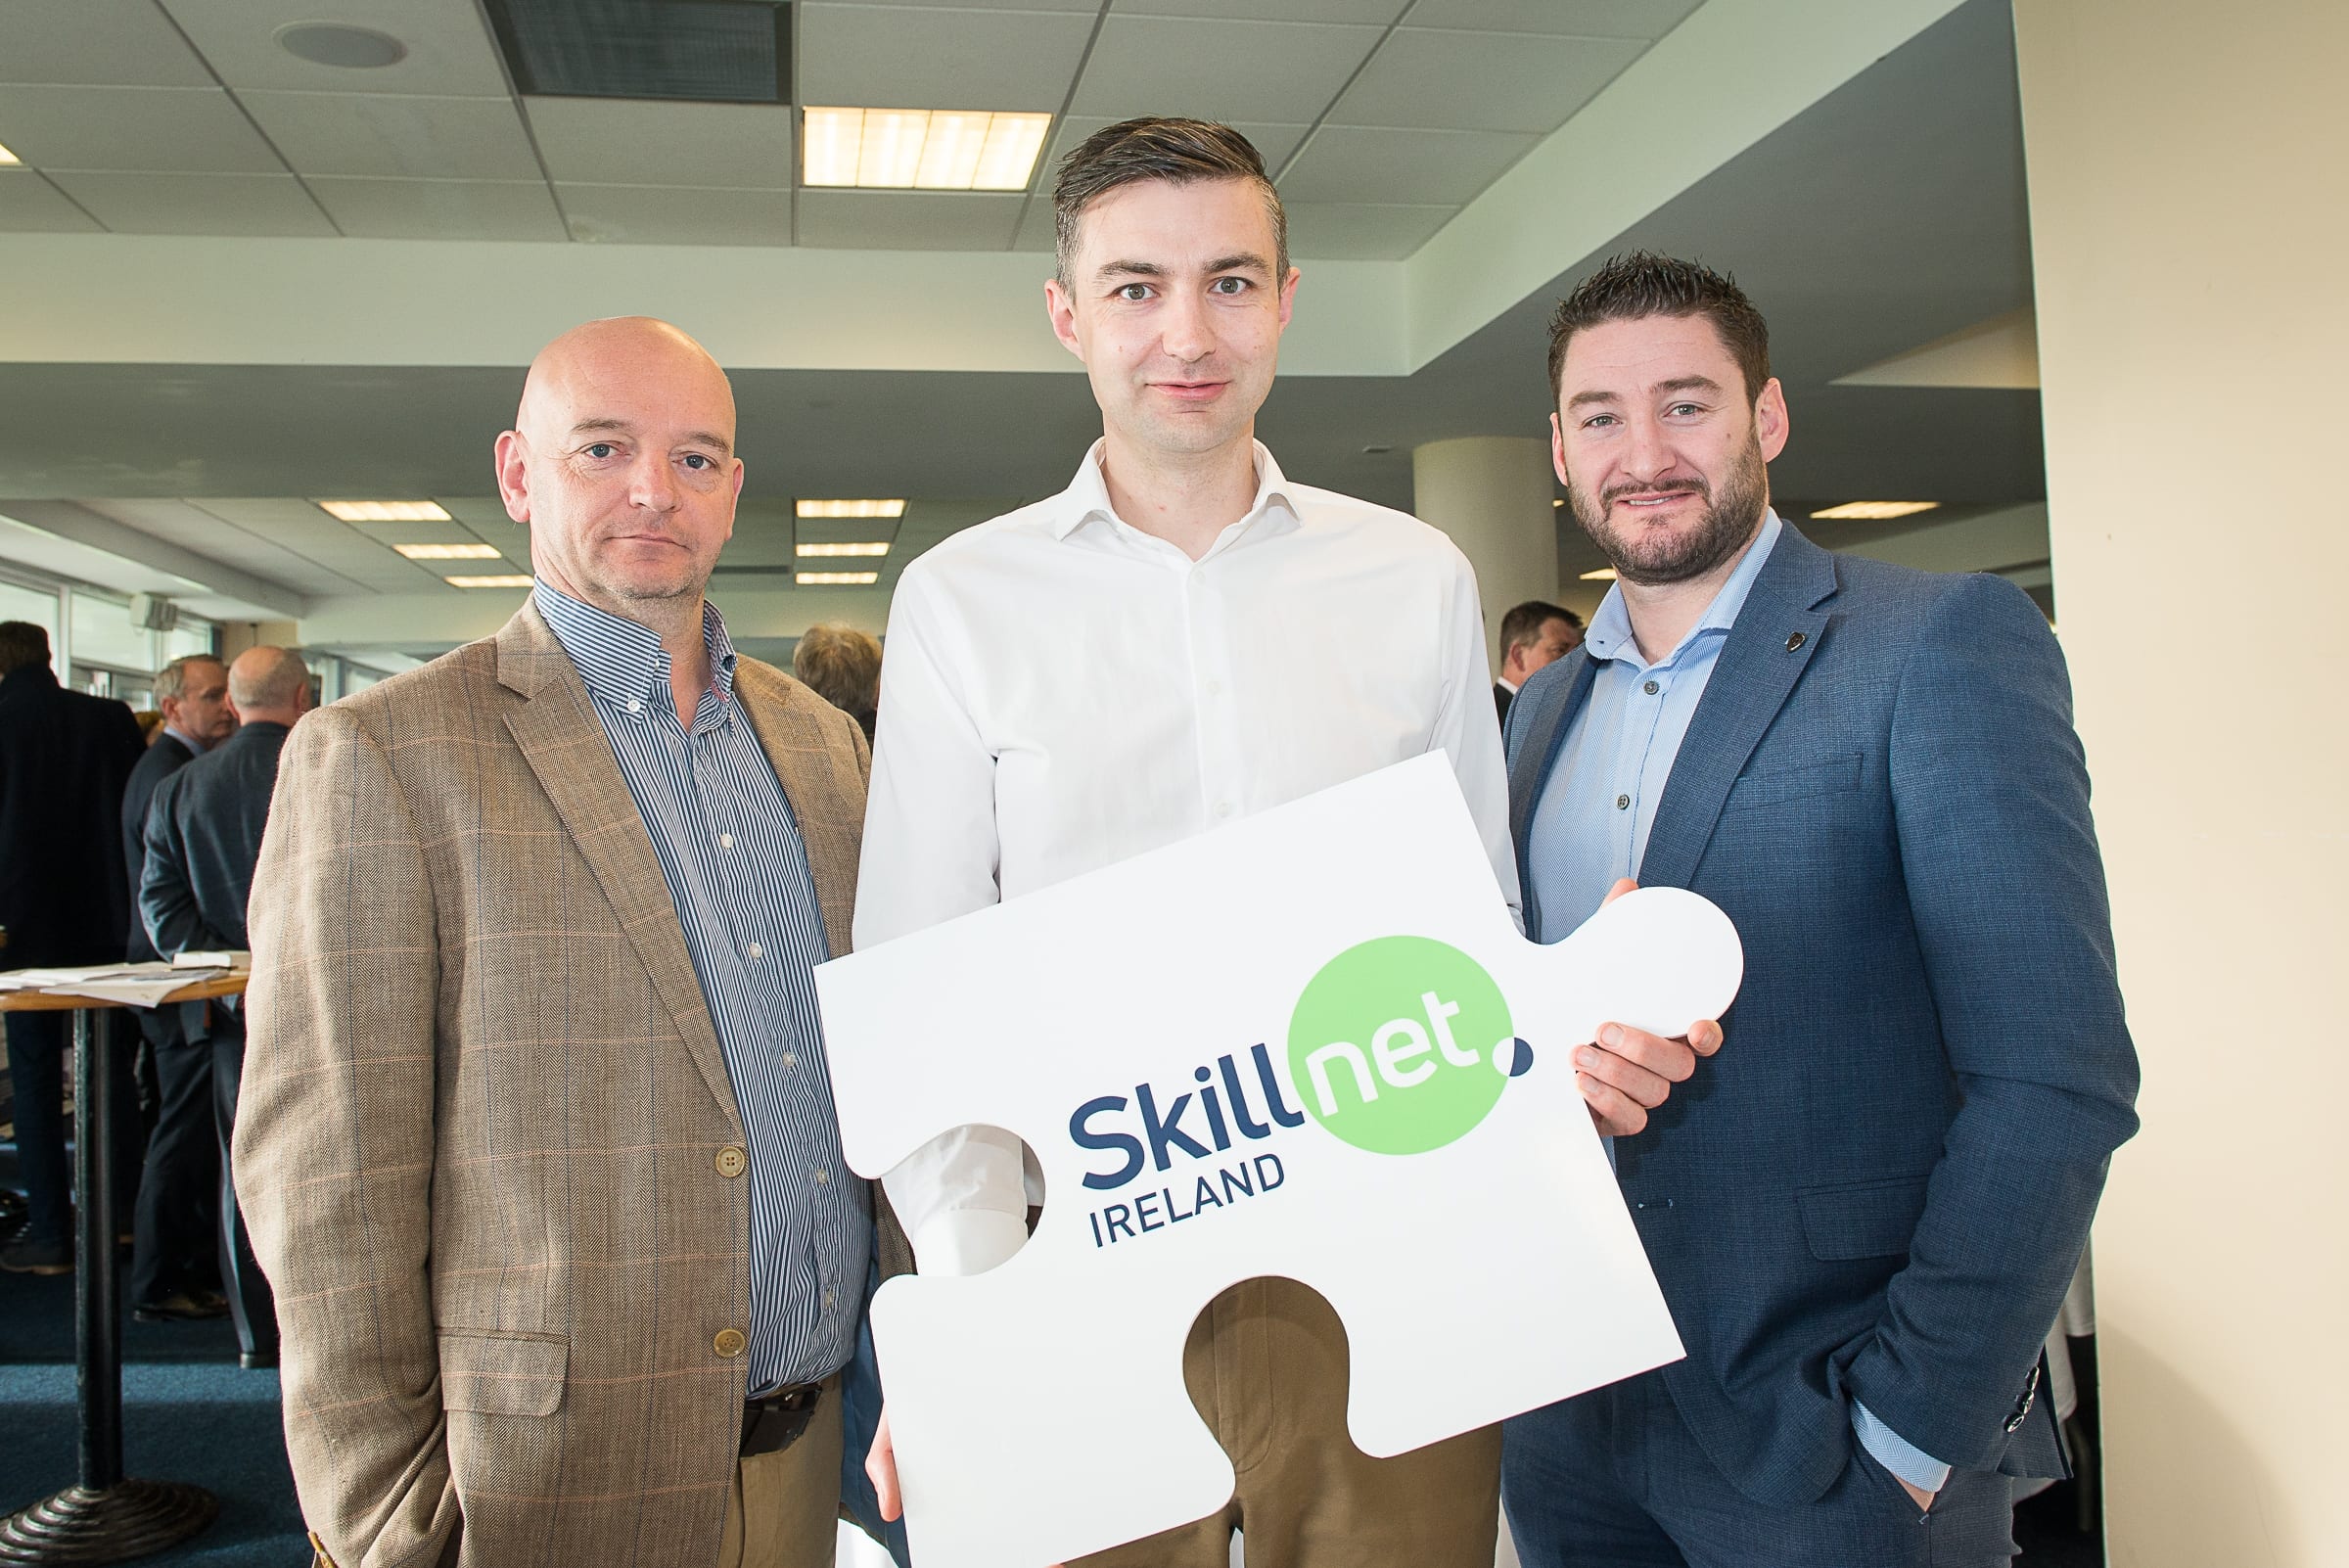 From Left to Right:  Upskilling the MidWest with John Kiely which took place on the 30th April in function room of the Limerick Racecourse: Fergus Chawke - Employmum, Rory Corbett - Azon Recruitment, Keith Mathews  - Metis Ireland.